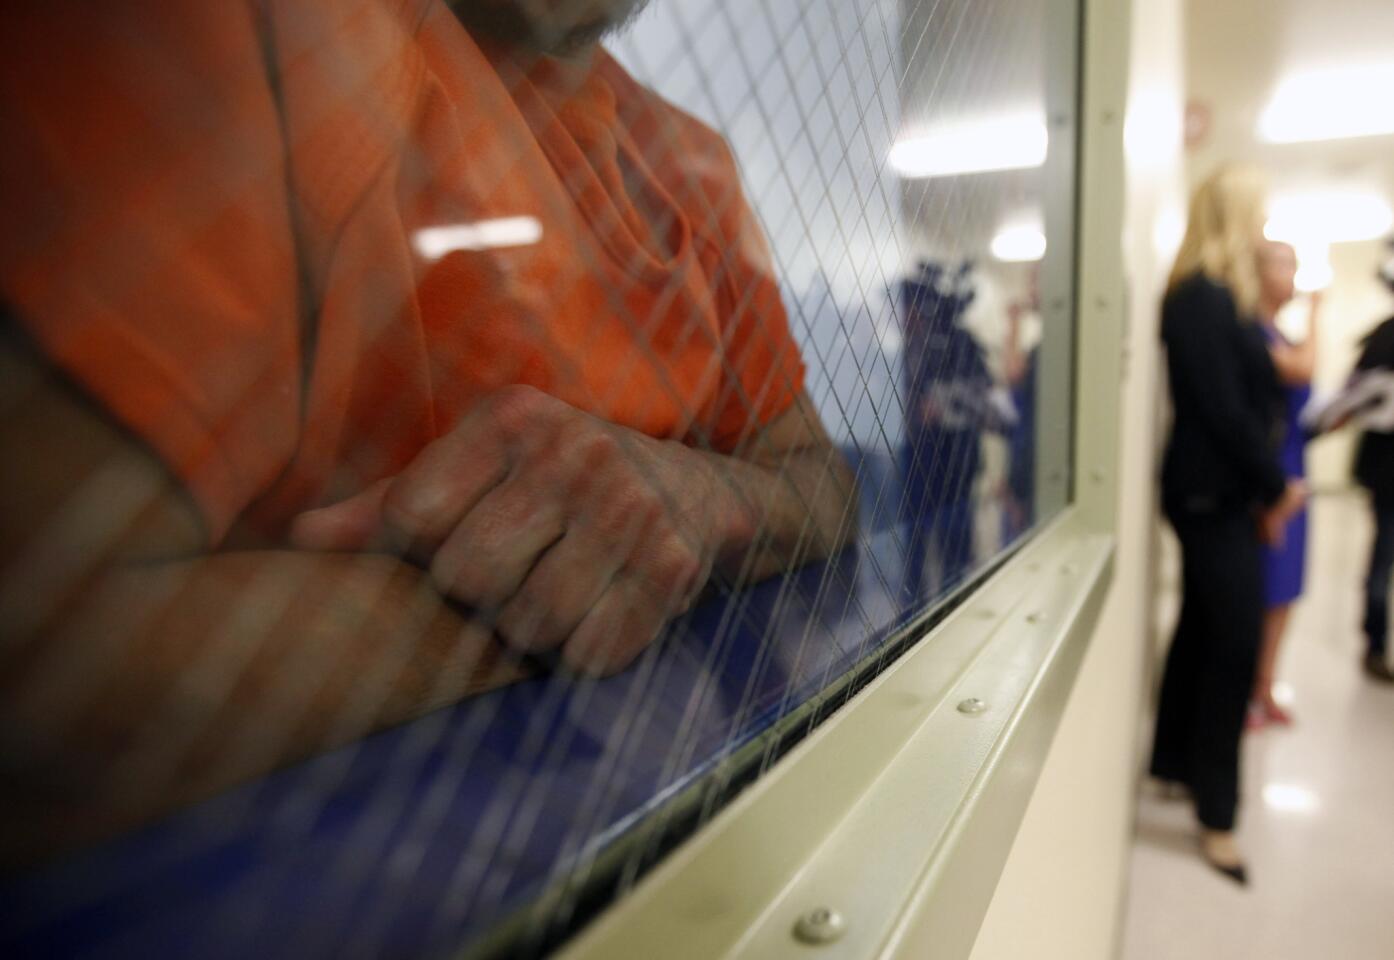 A detainee looks out from a holding area at the new immigrant detention center in Bakersfield.